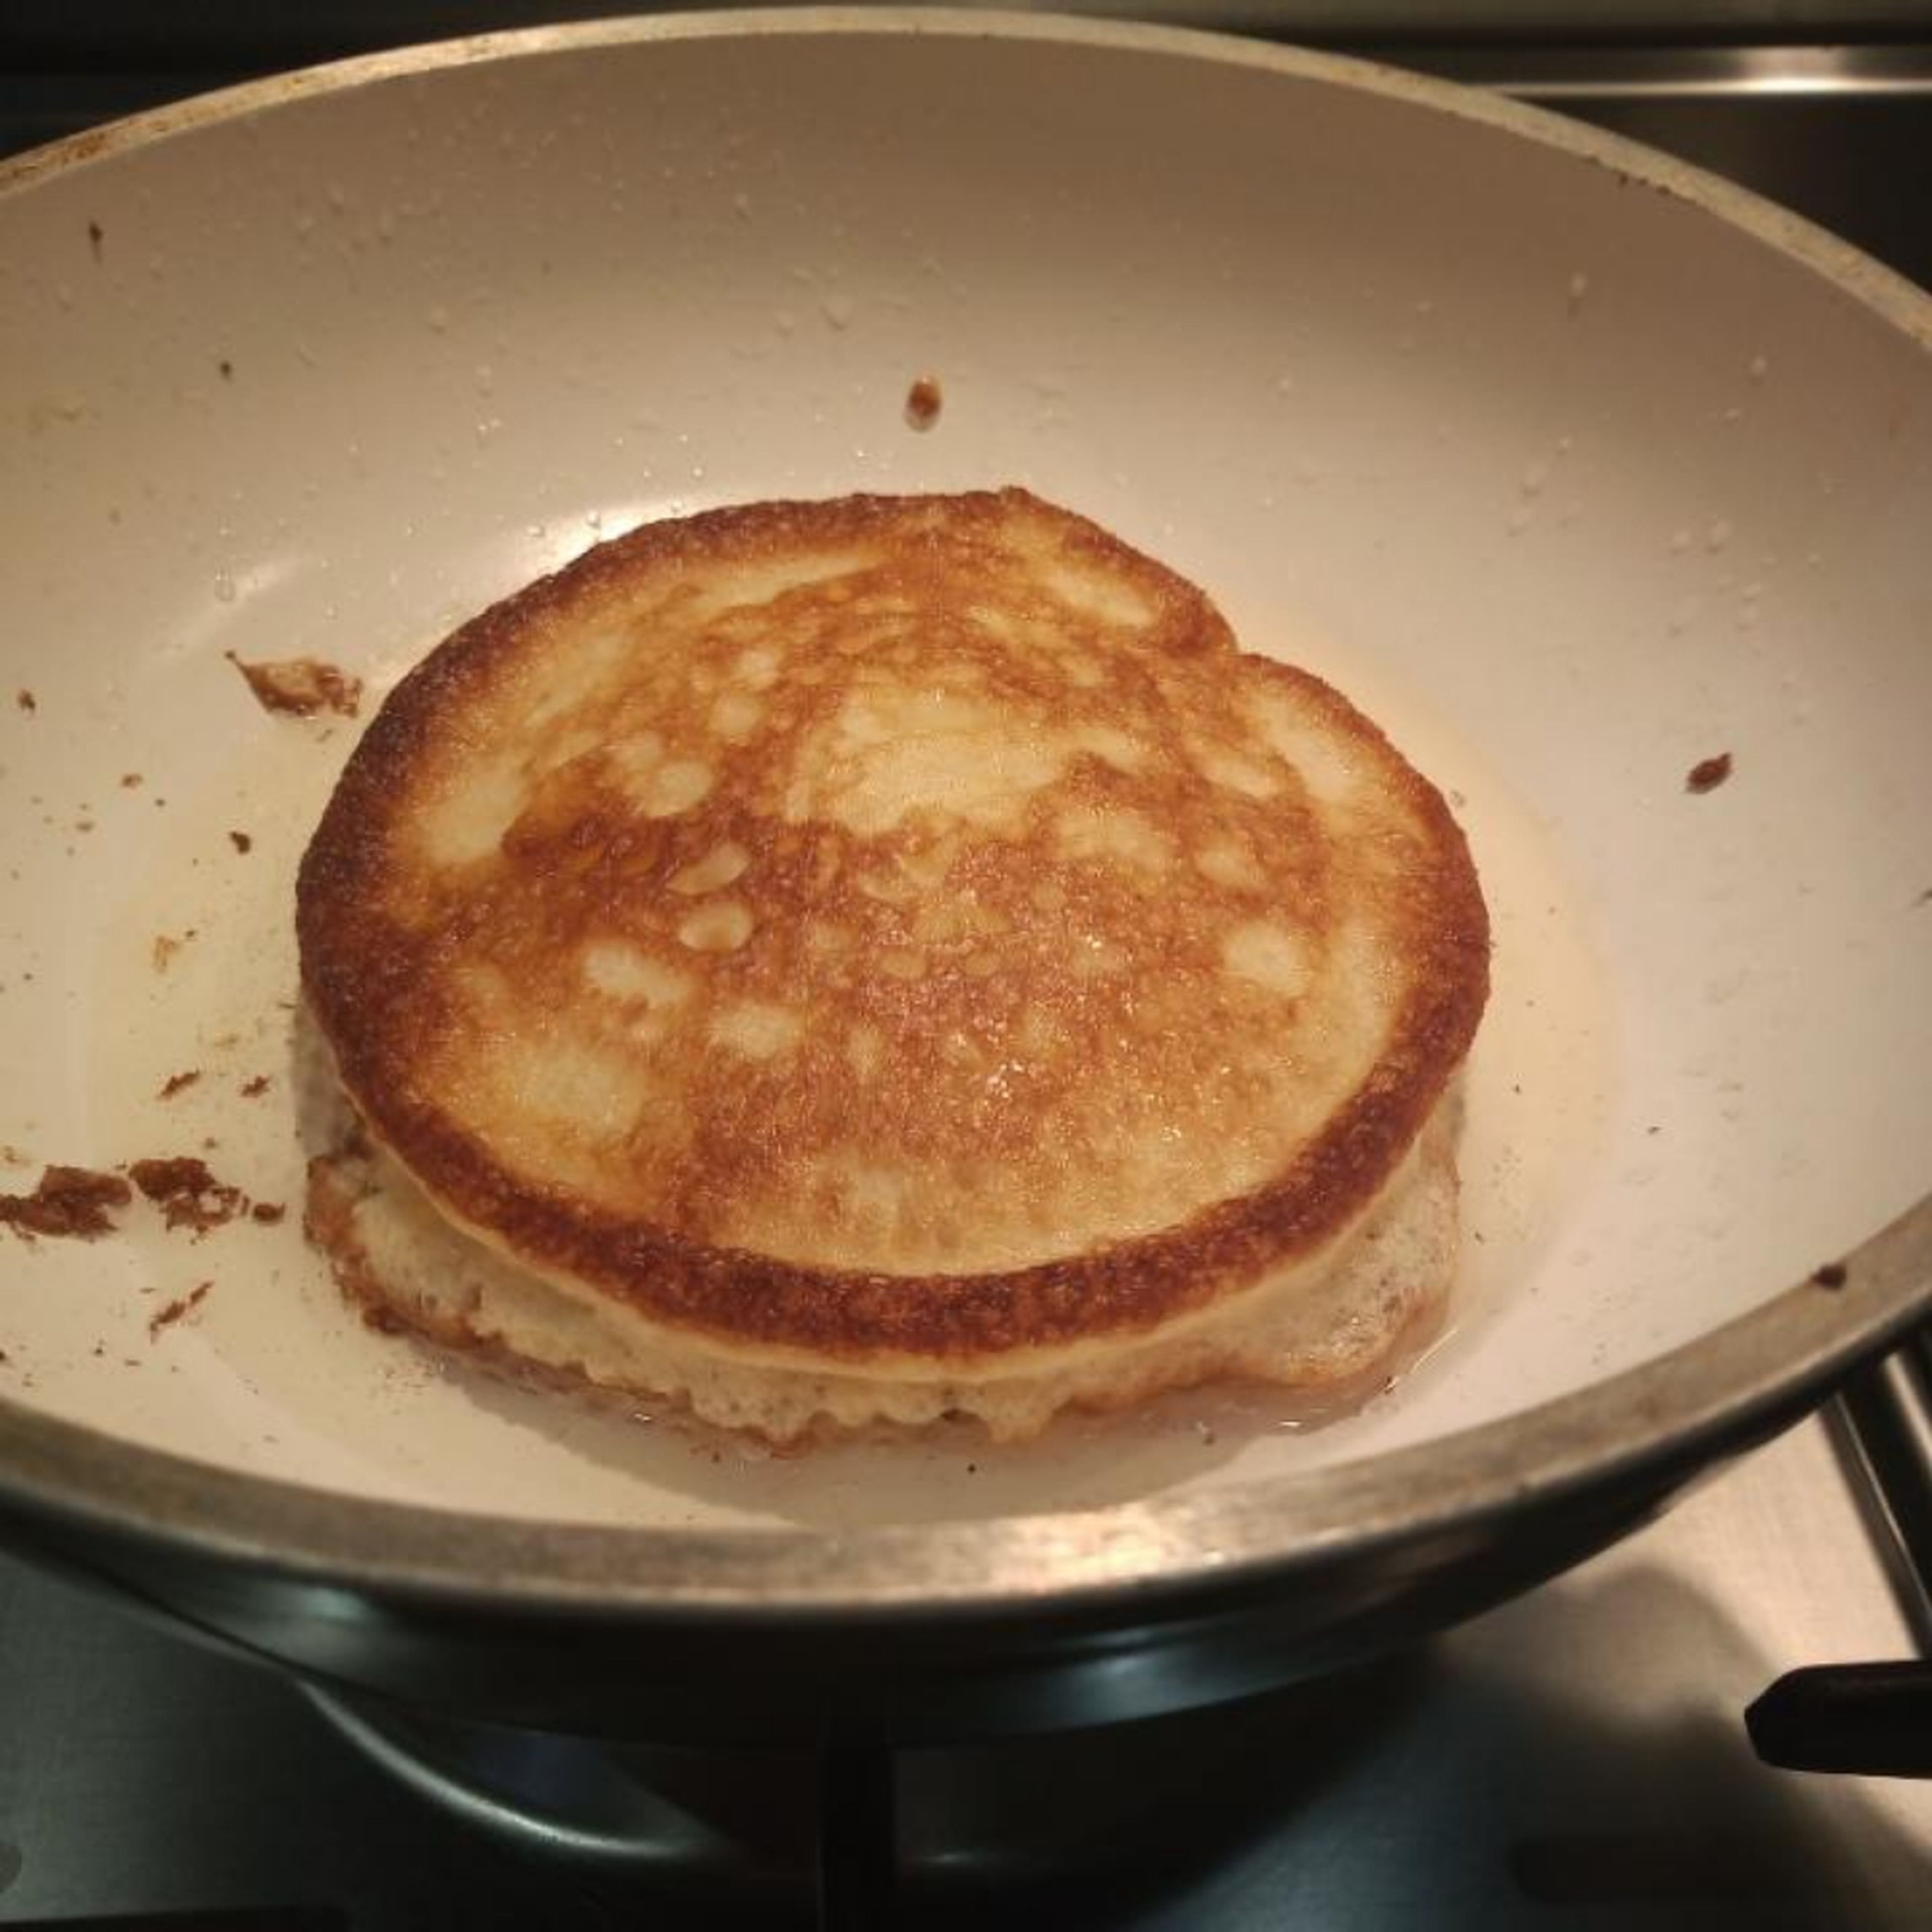 Heat a lightly oiled frying pan over medium heat. Cook pancakes, ensuring they are all the same size (approx. 10cm diameter), until golden brown on both sides.